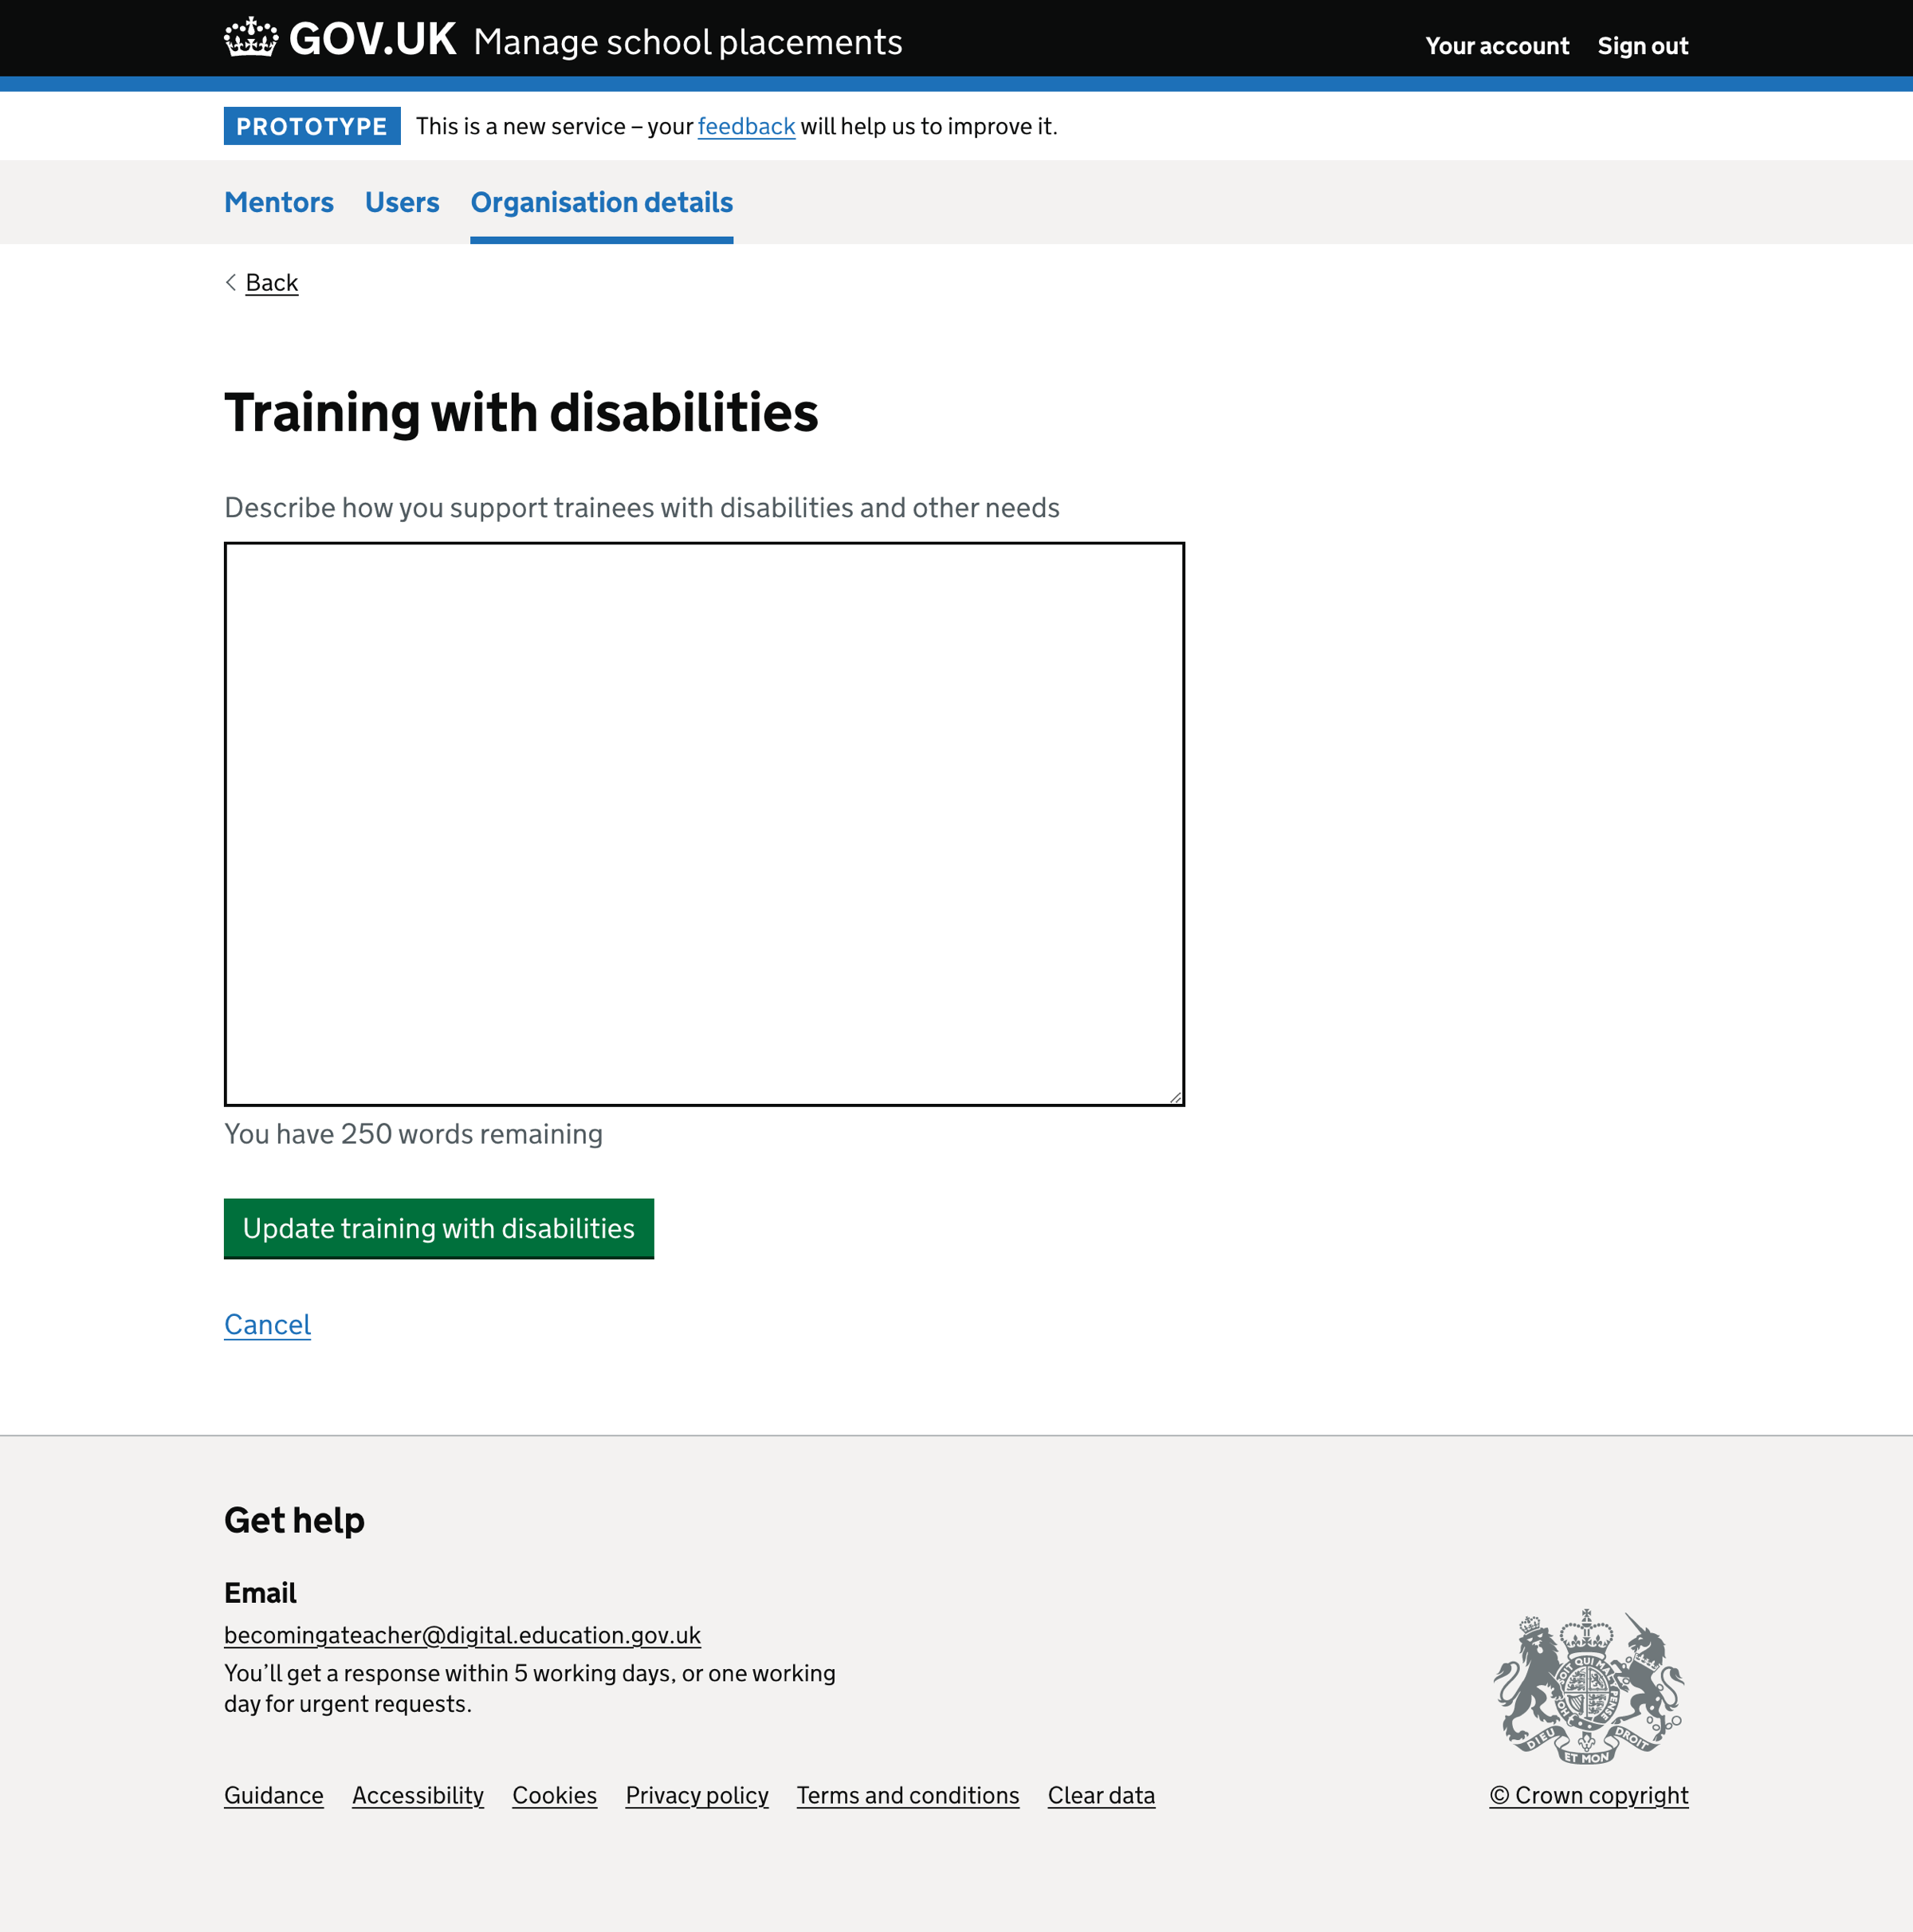 Image showing the organisation training with disabilities question